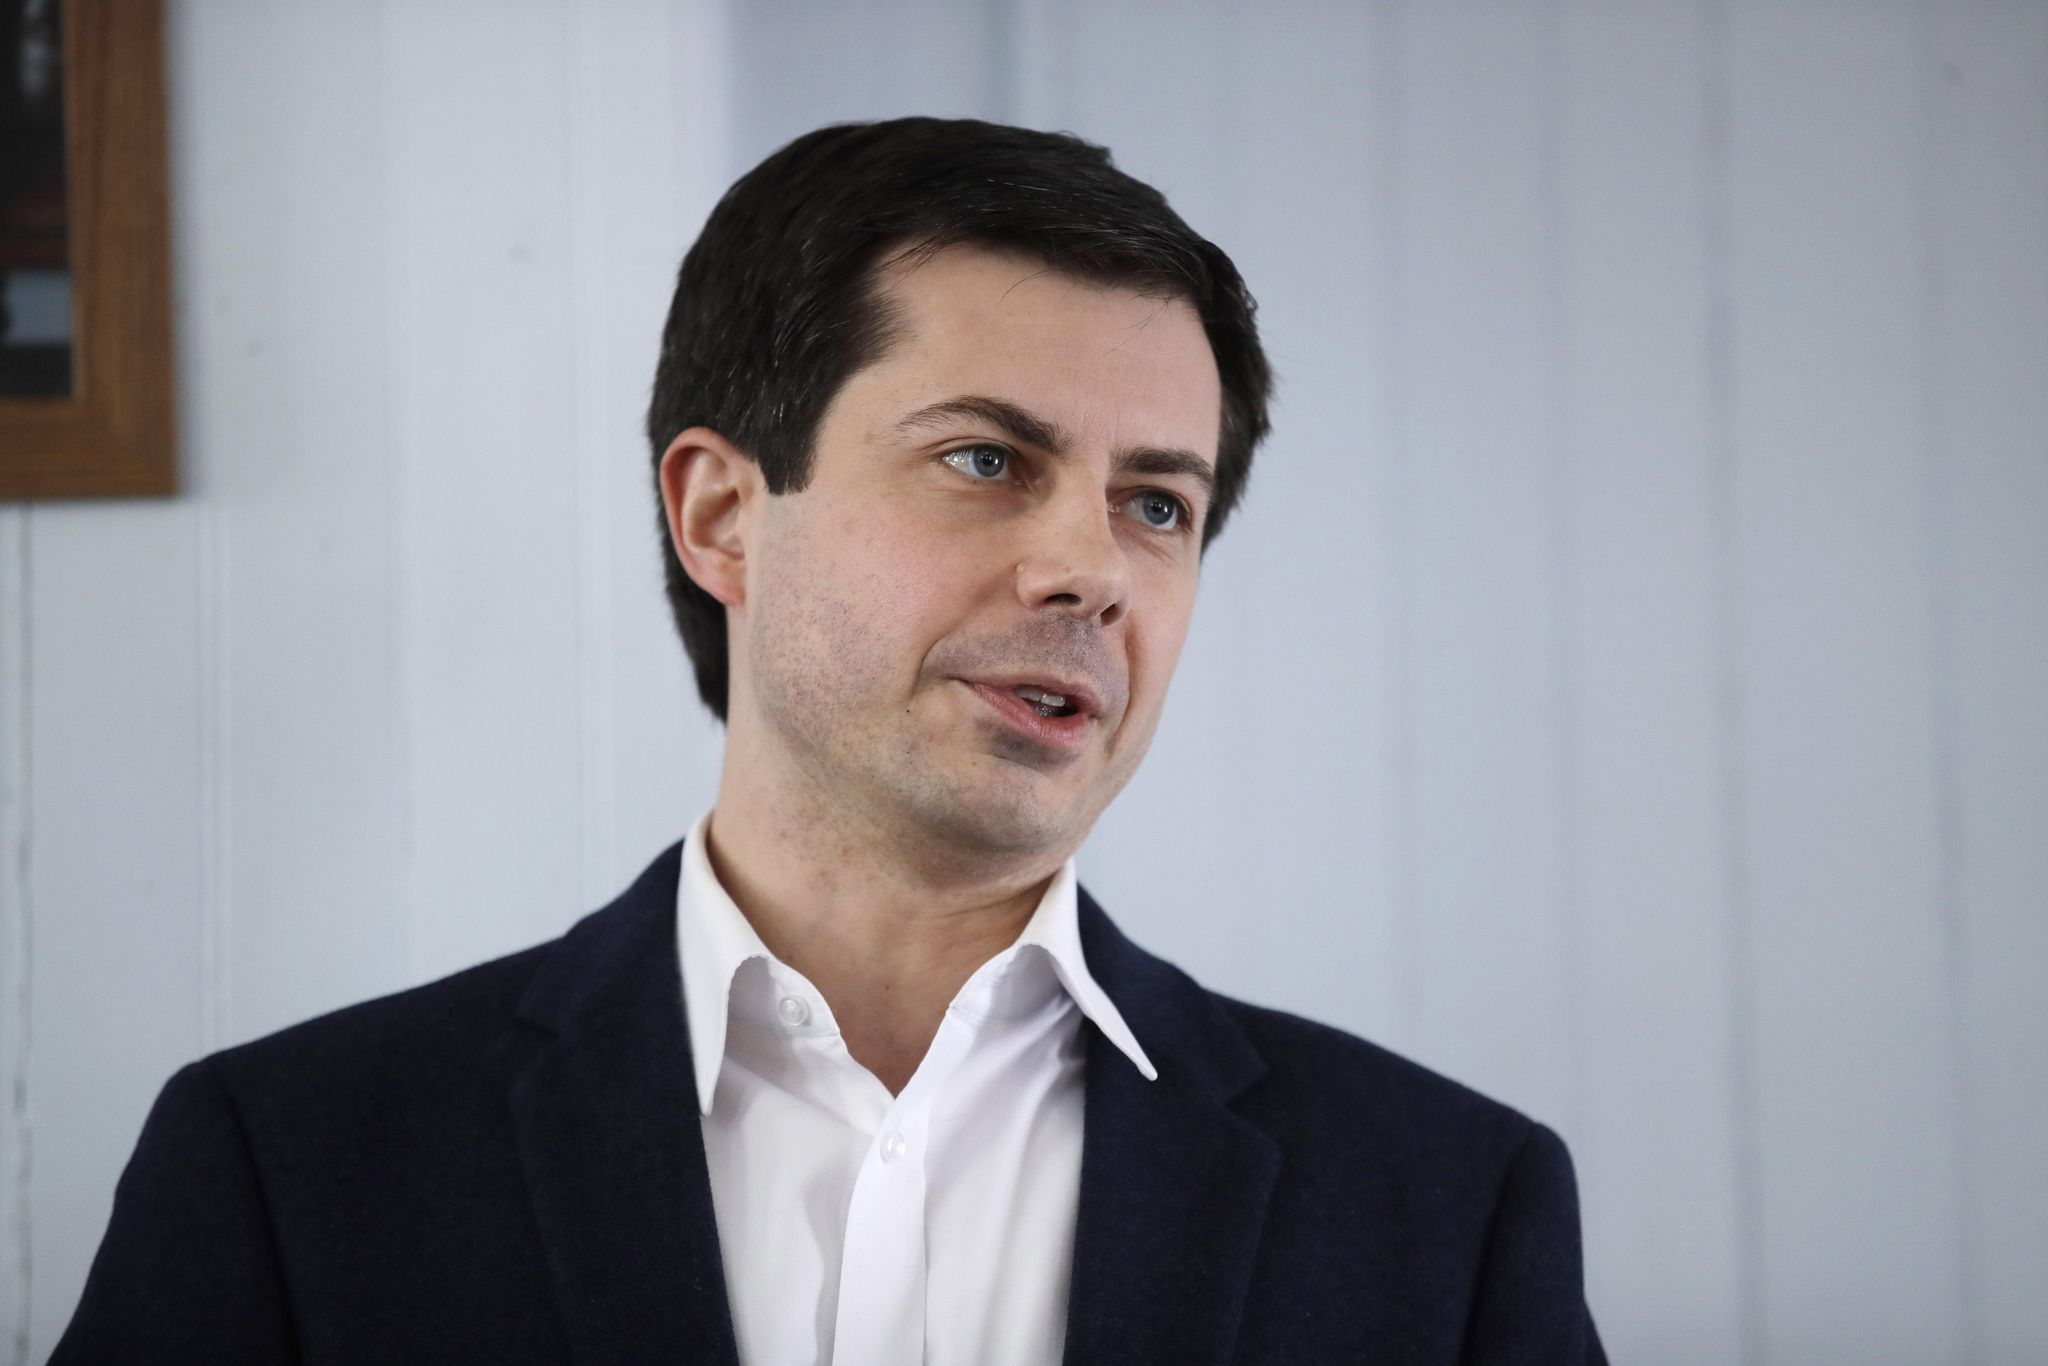 Flipboard: 2020 Democratic candidate Pete Buttigieg says this is 'the biggest problem ...2048 x 1366